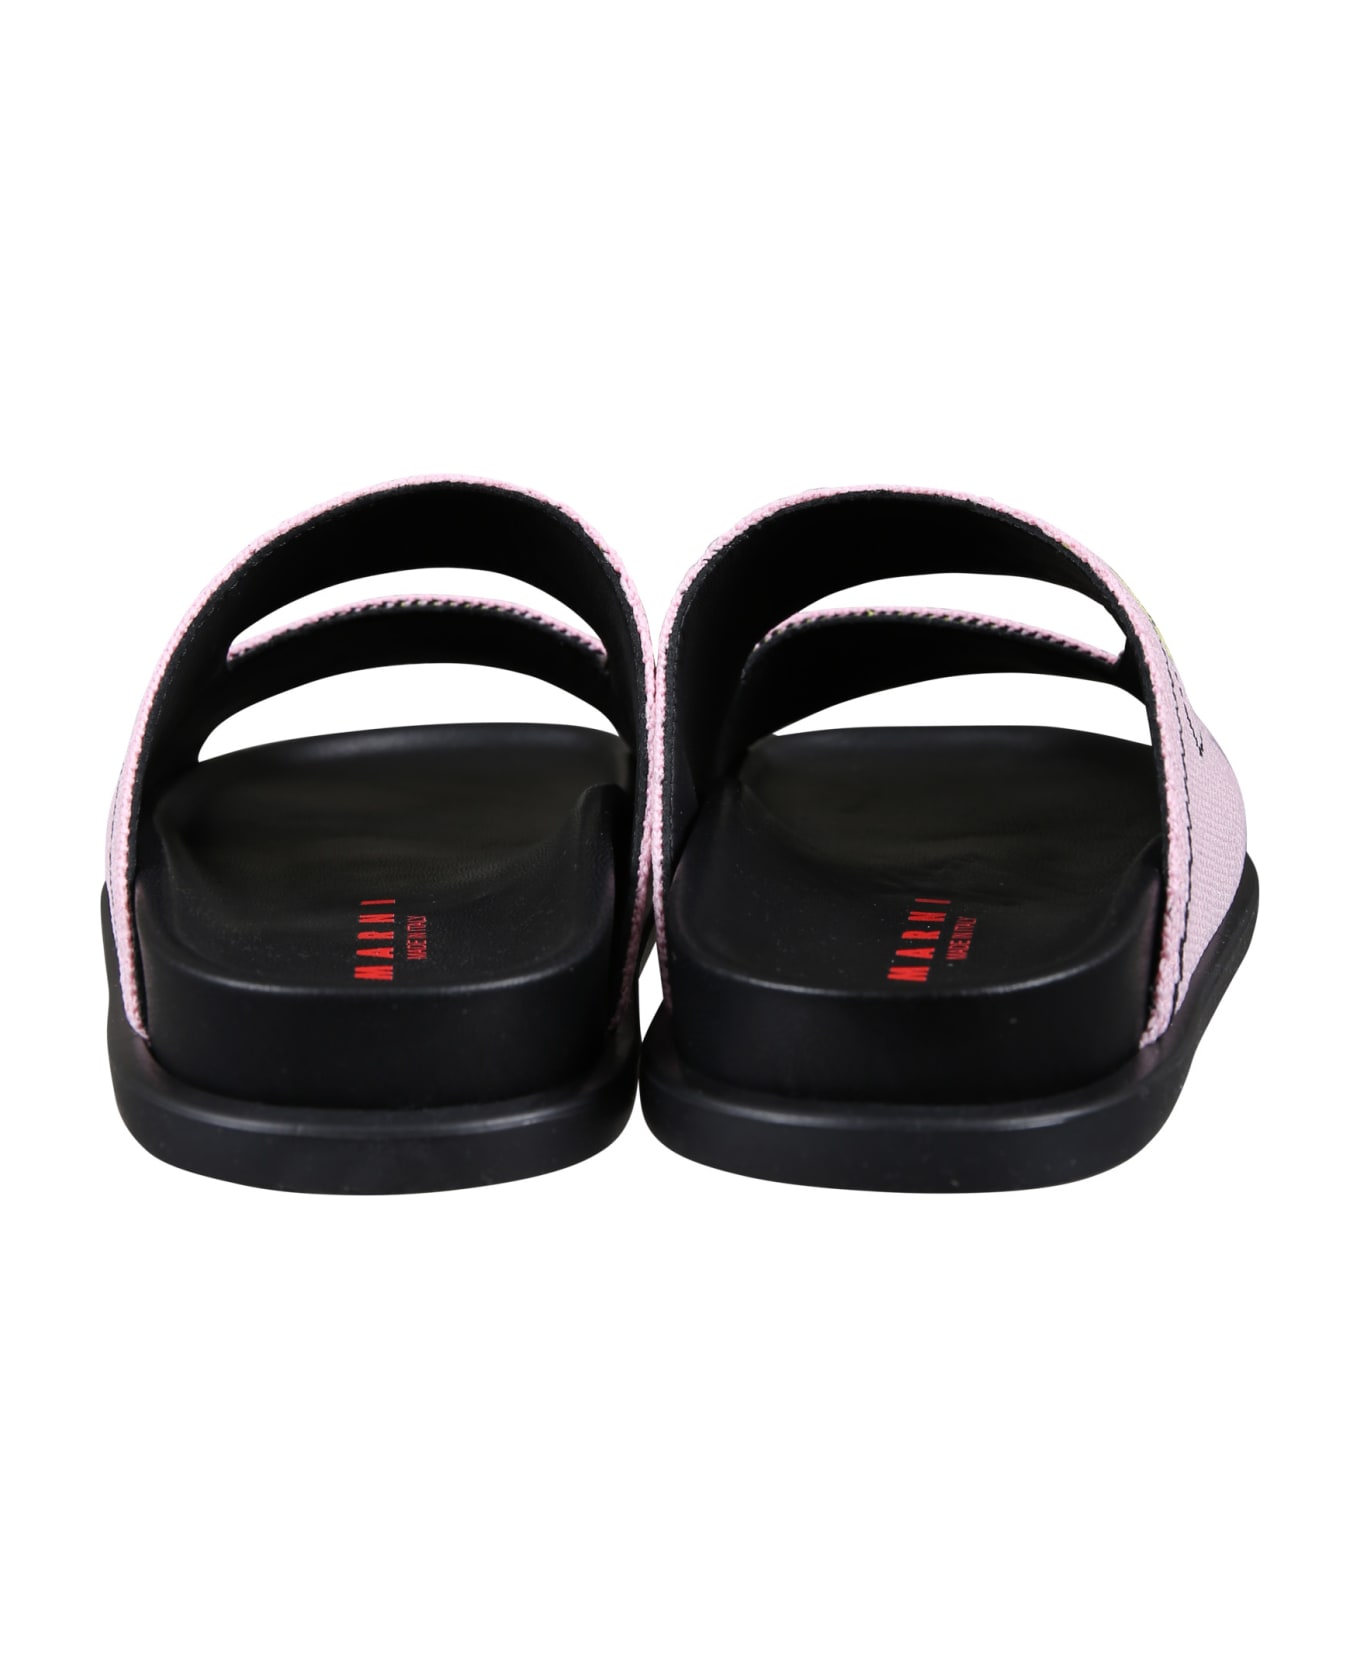 Marni Pink Slippers For Girl - Pink シューズ